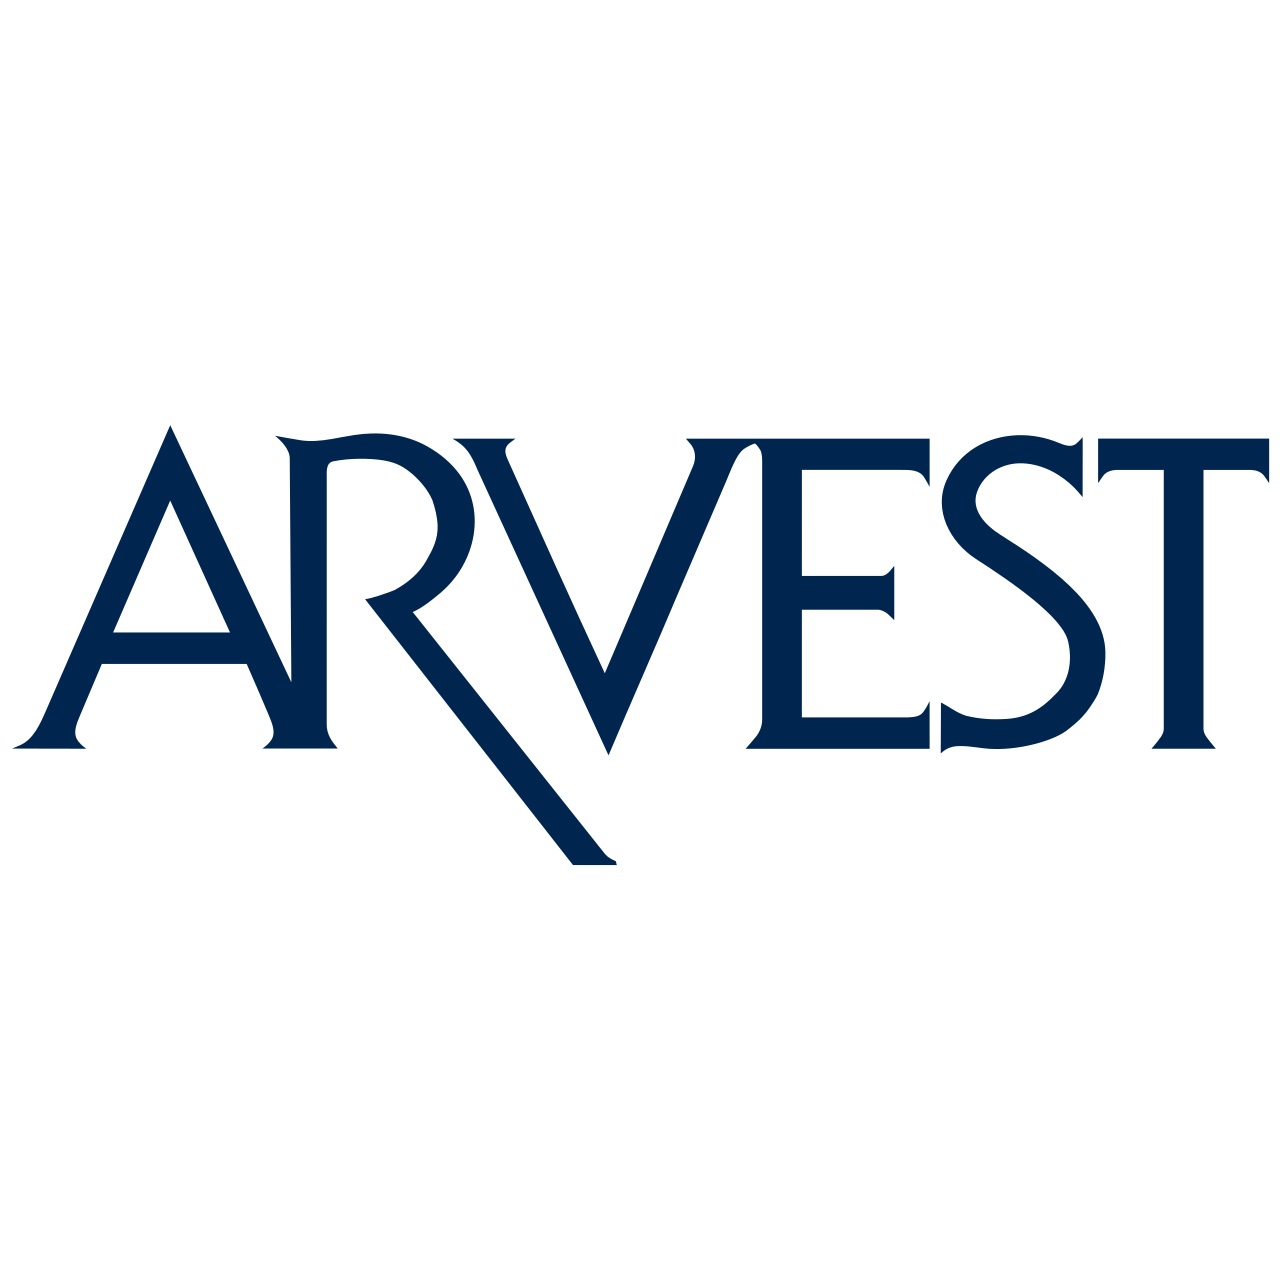 Arvest Bank teams up with Google Cloud to boost digital transformation